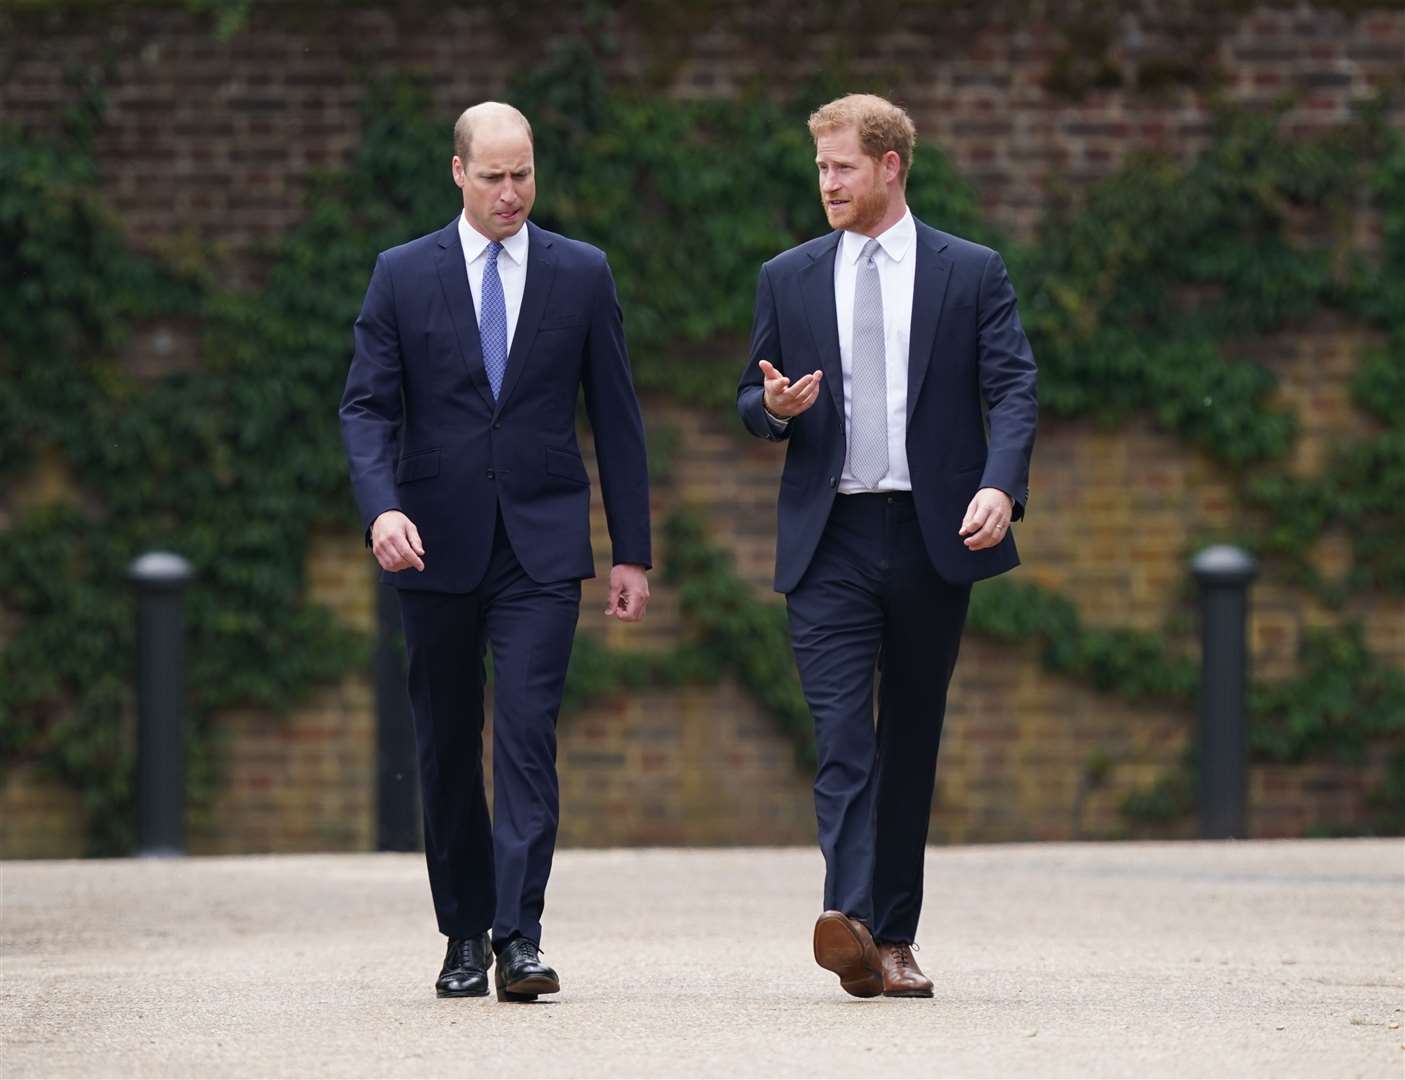 The Duke of Cambridge and Duke of Sussex arrived side by side (Yui Mok/PA)